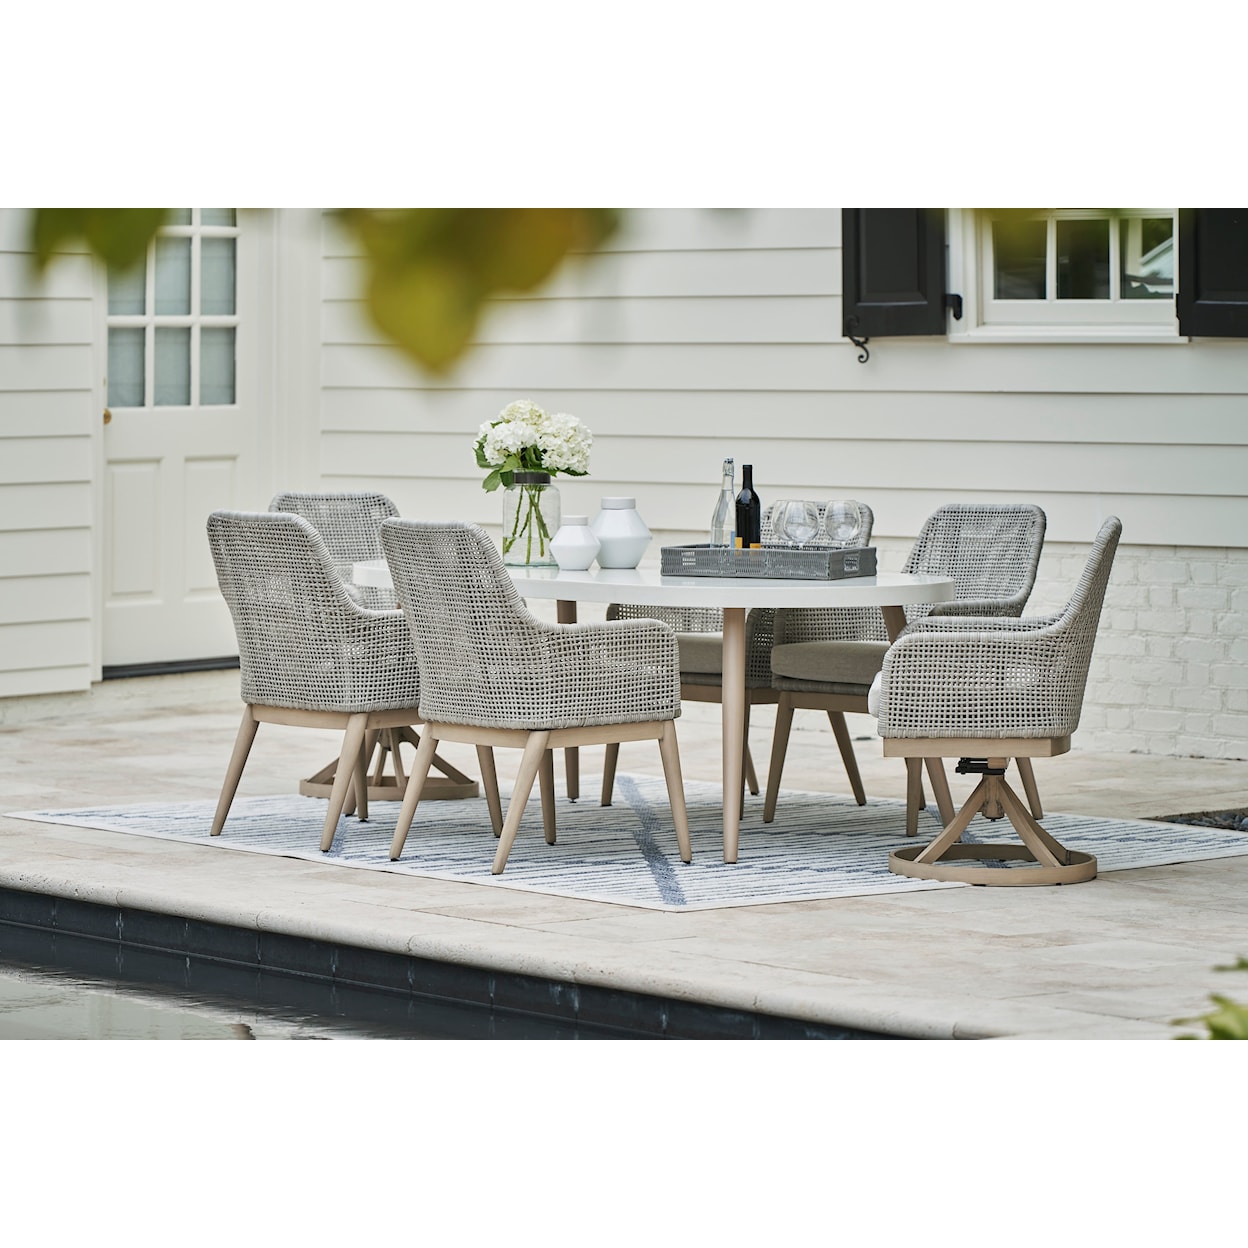 Signature Design by Ashley Seton Creek Outdoor Swivel Dining Chair (Set of 2)